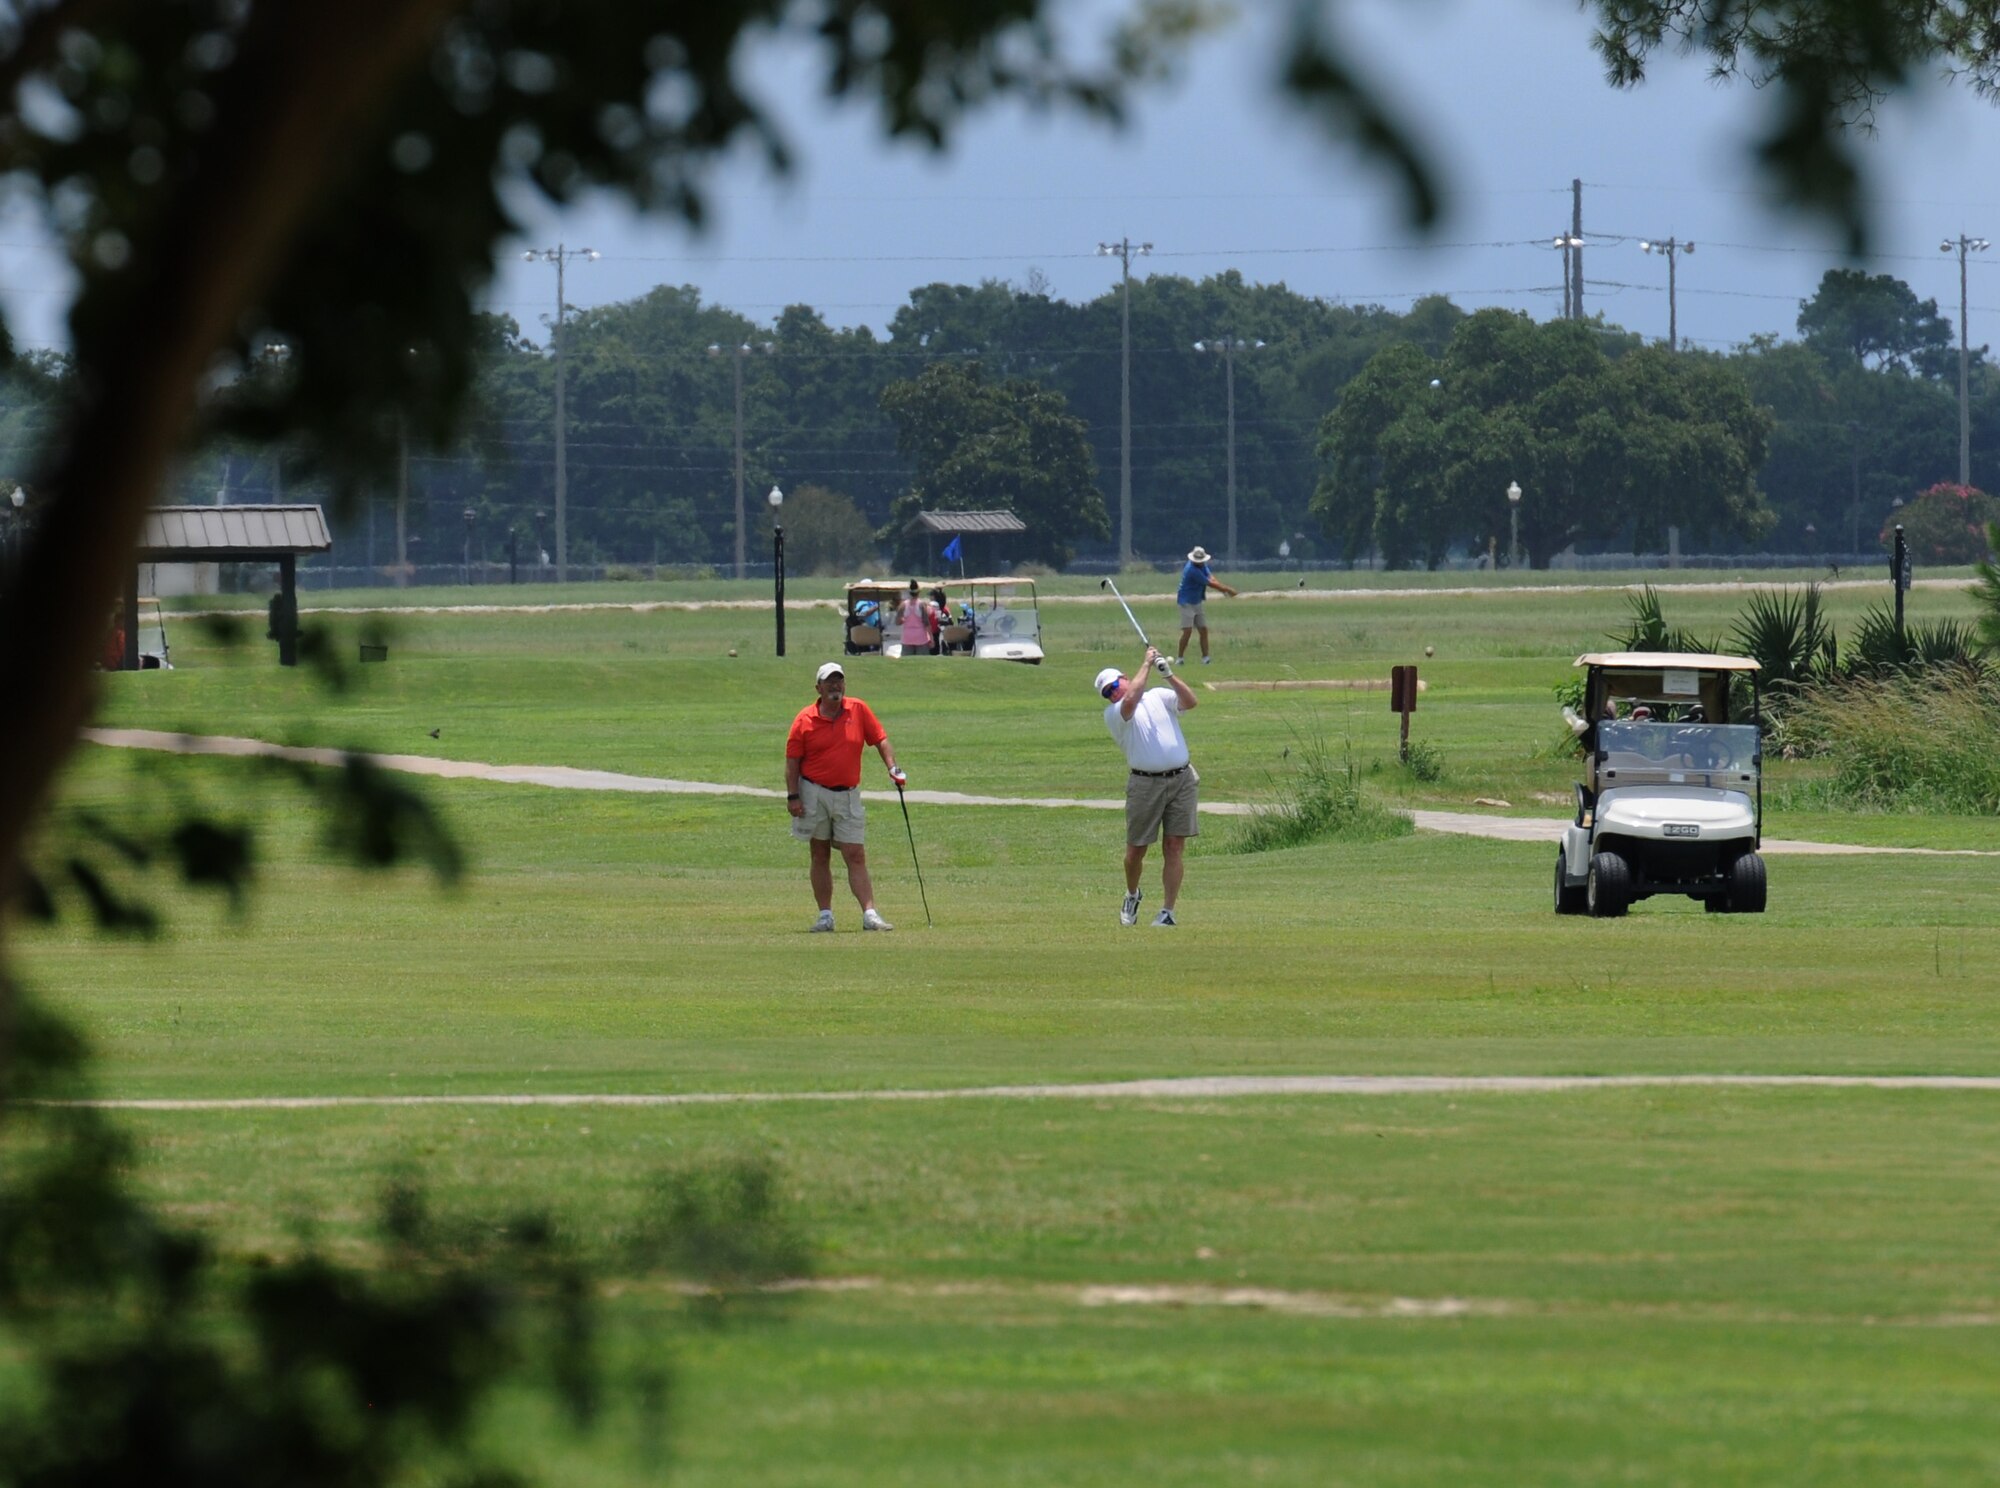 Retired Brig. Gen. Richard Moss and Jerry Munro, Biloxi Bay Chamber of Commerce board members, participate in the Don Wylie Memorial Golf Tournament at the Bay Breeze Golf Course June 17, 2016, Keesler Air Force Base, Miss. The annual tournament raised funds to help the Military & Veterans Affairs committee honor military members. (U.S. Air Force photo by Kemberly Groue)